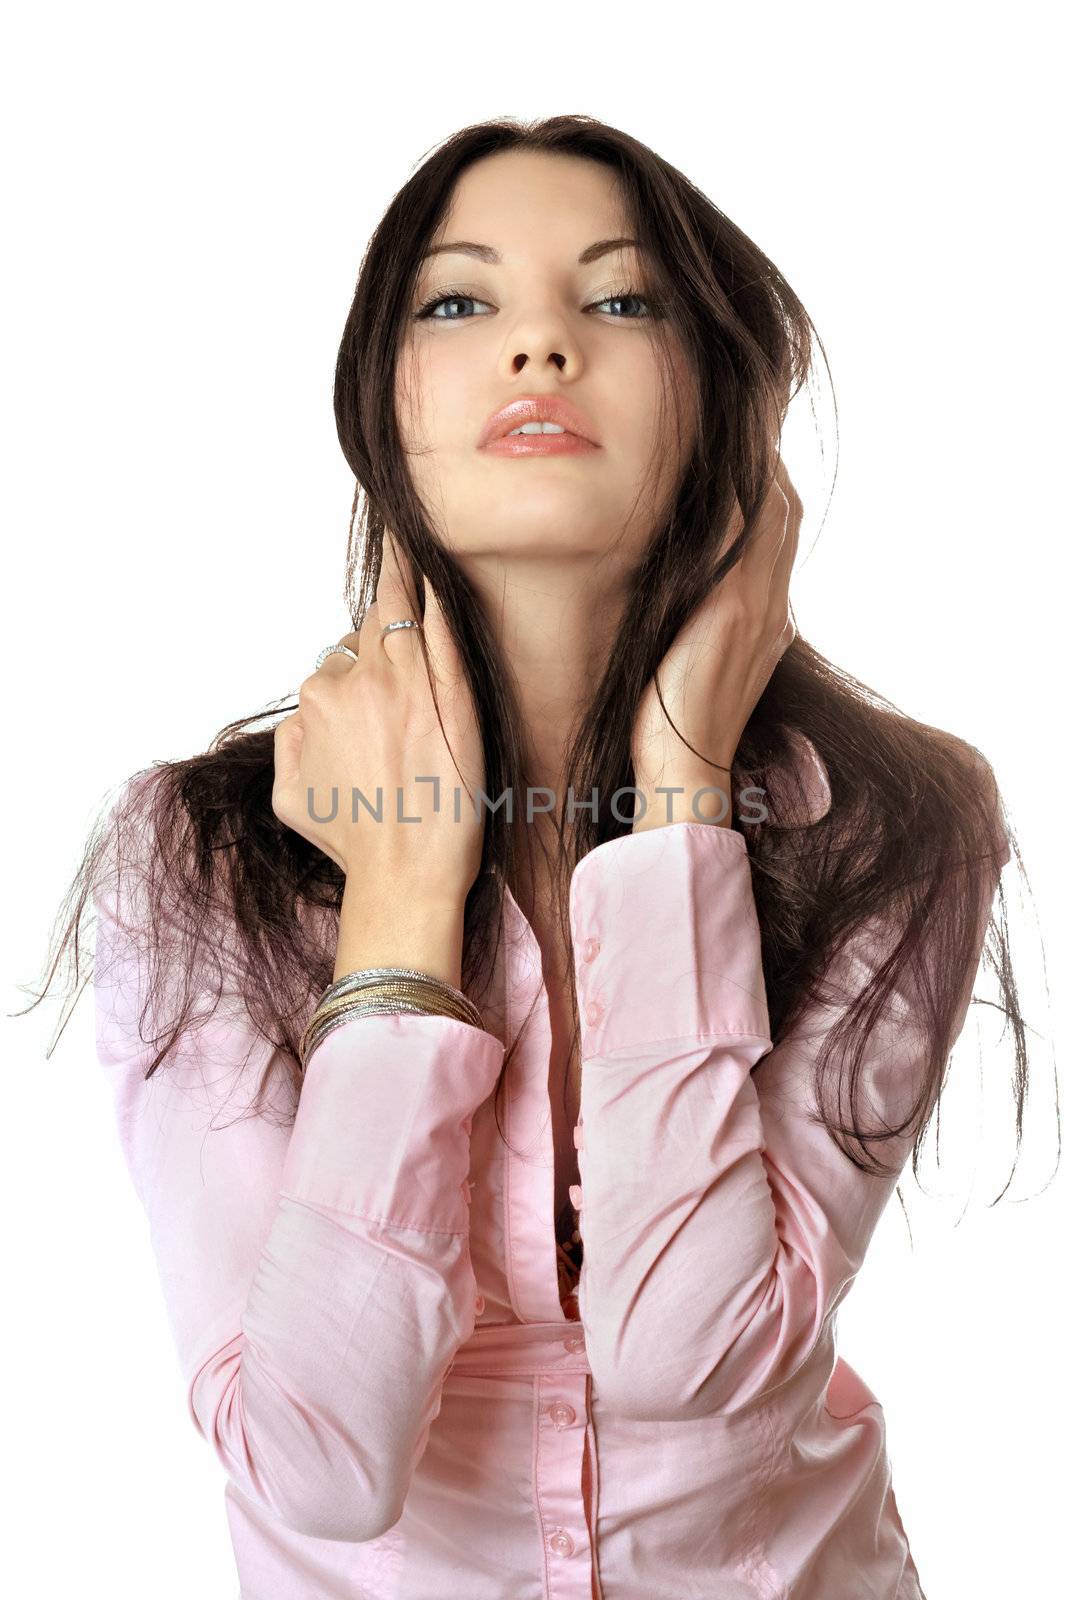 Portrait of pretty young woman in pink shirt by acidgrey